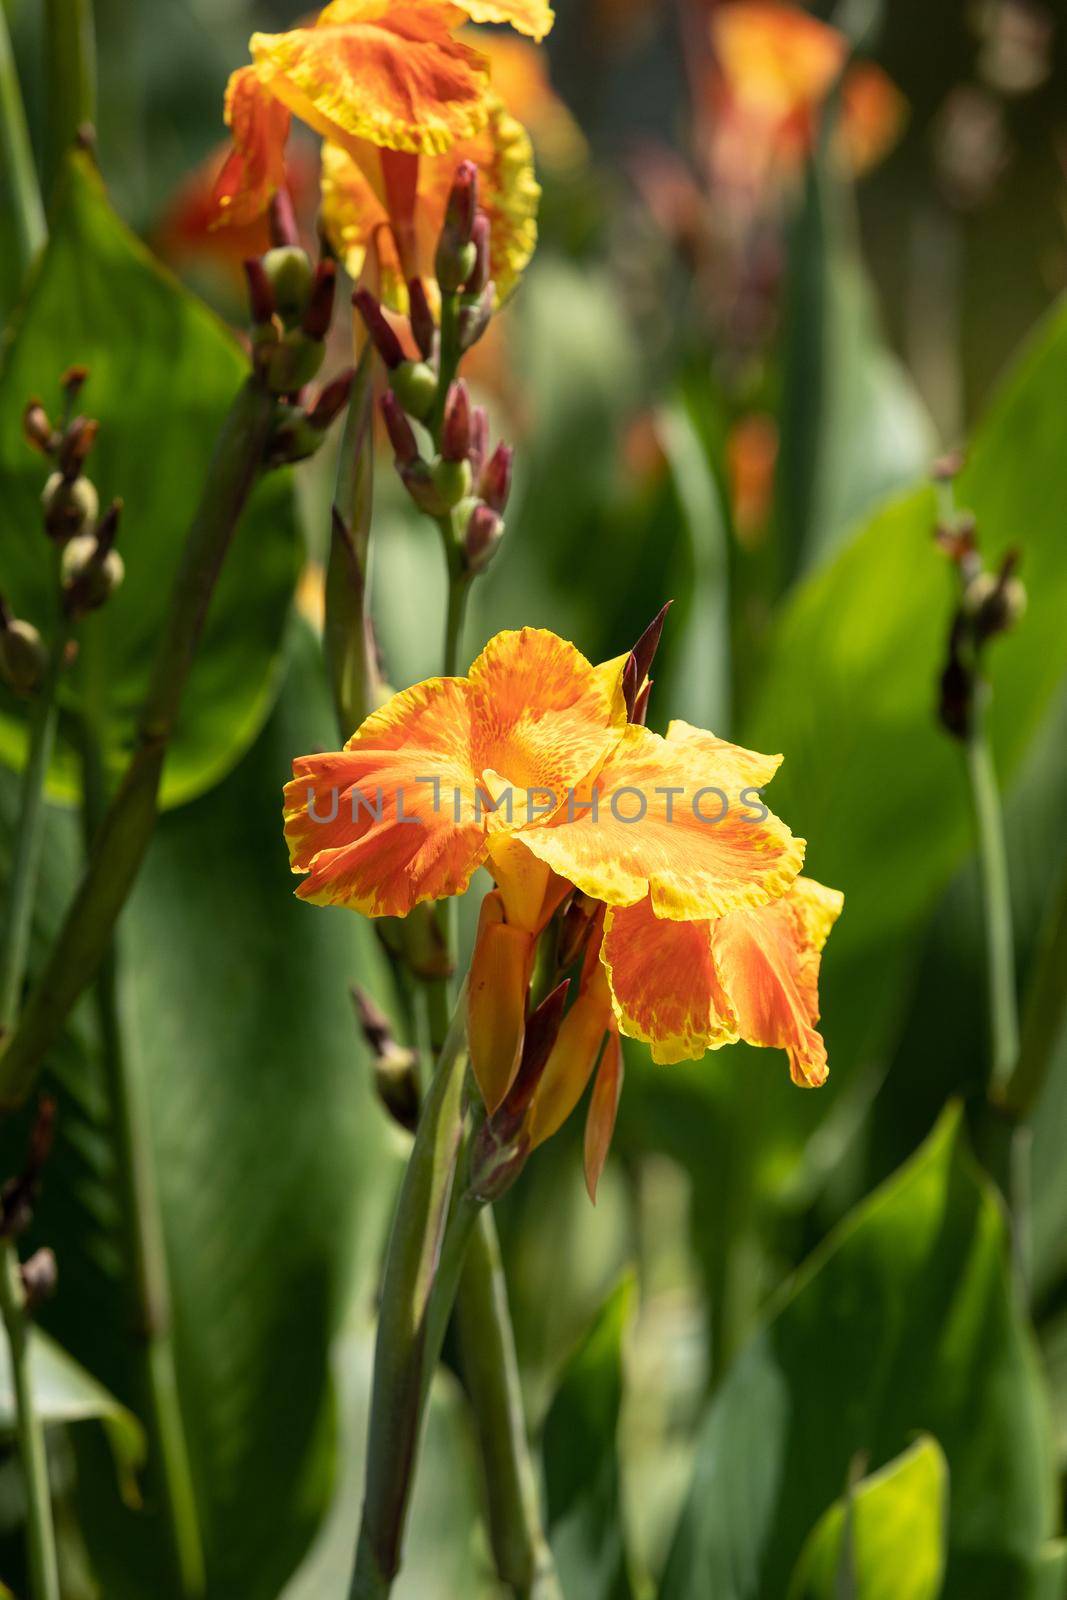 Orange Canna lily flower Canna indica in a swamp by steffstarr